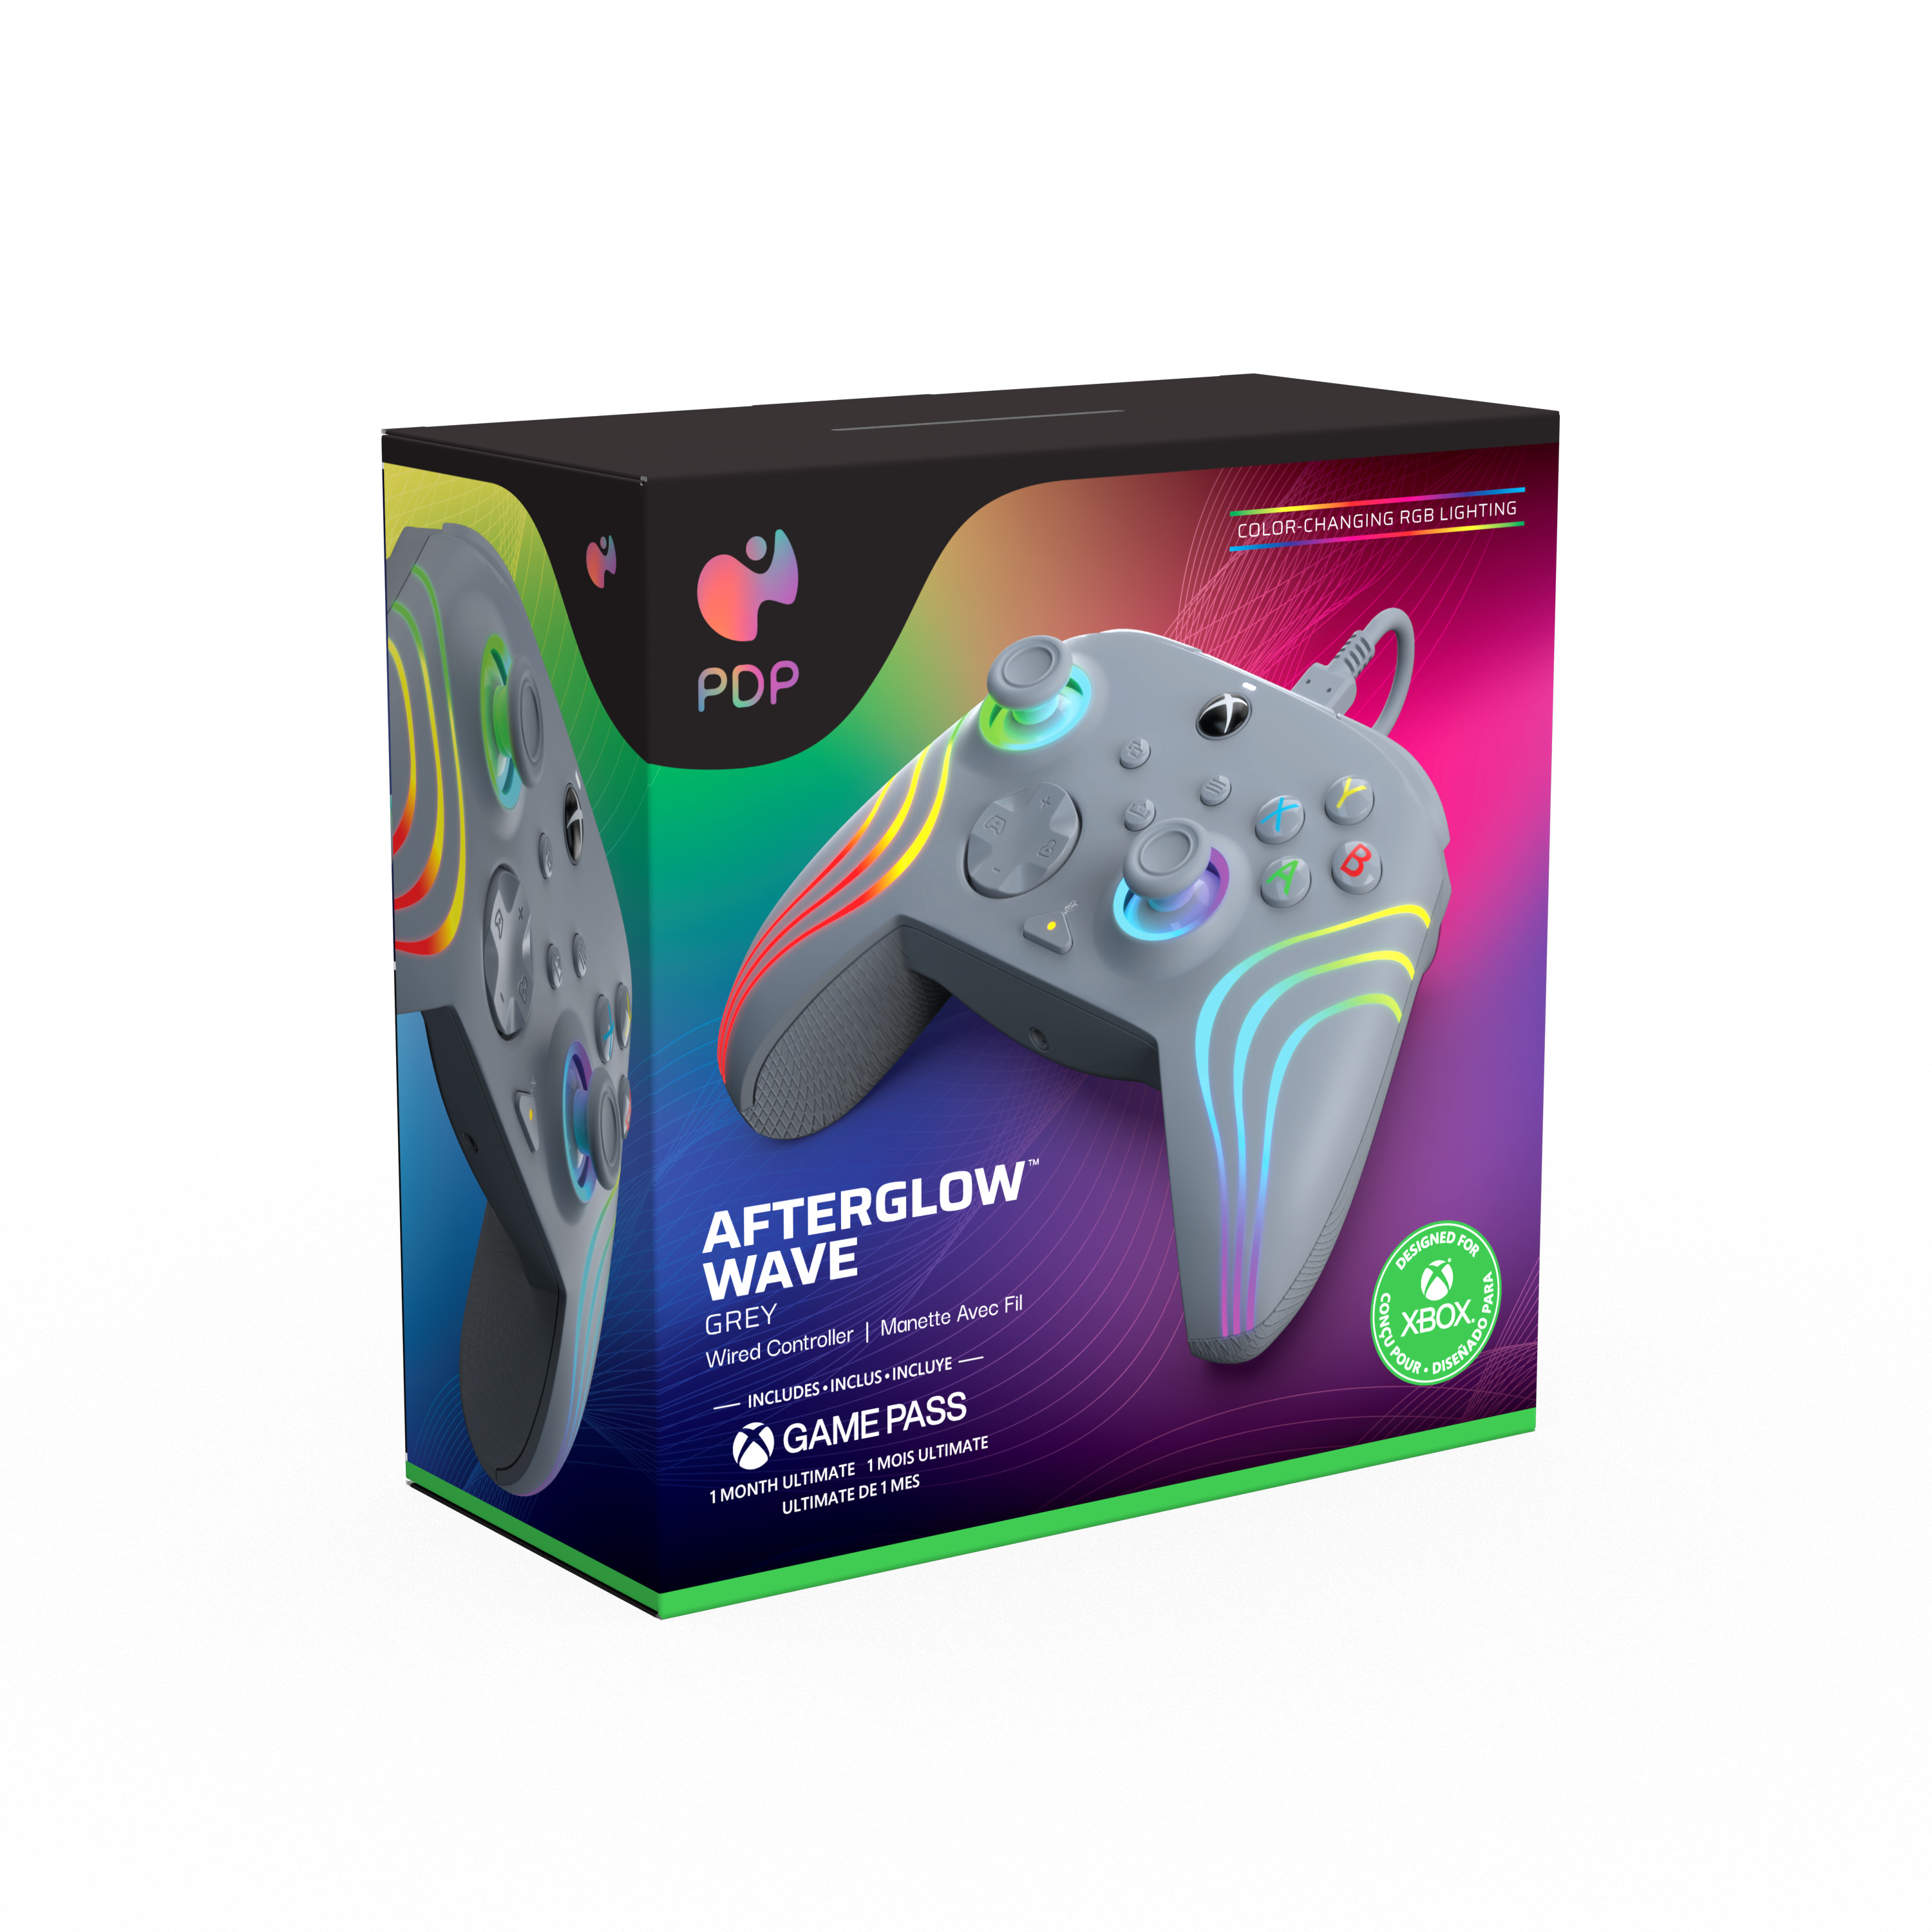 PDP Afterglow WAVE Wired Ctrl. 049-024-GE Xbox SeriesX, Grey